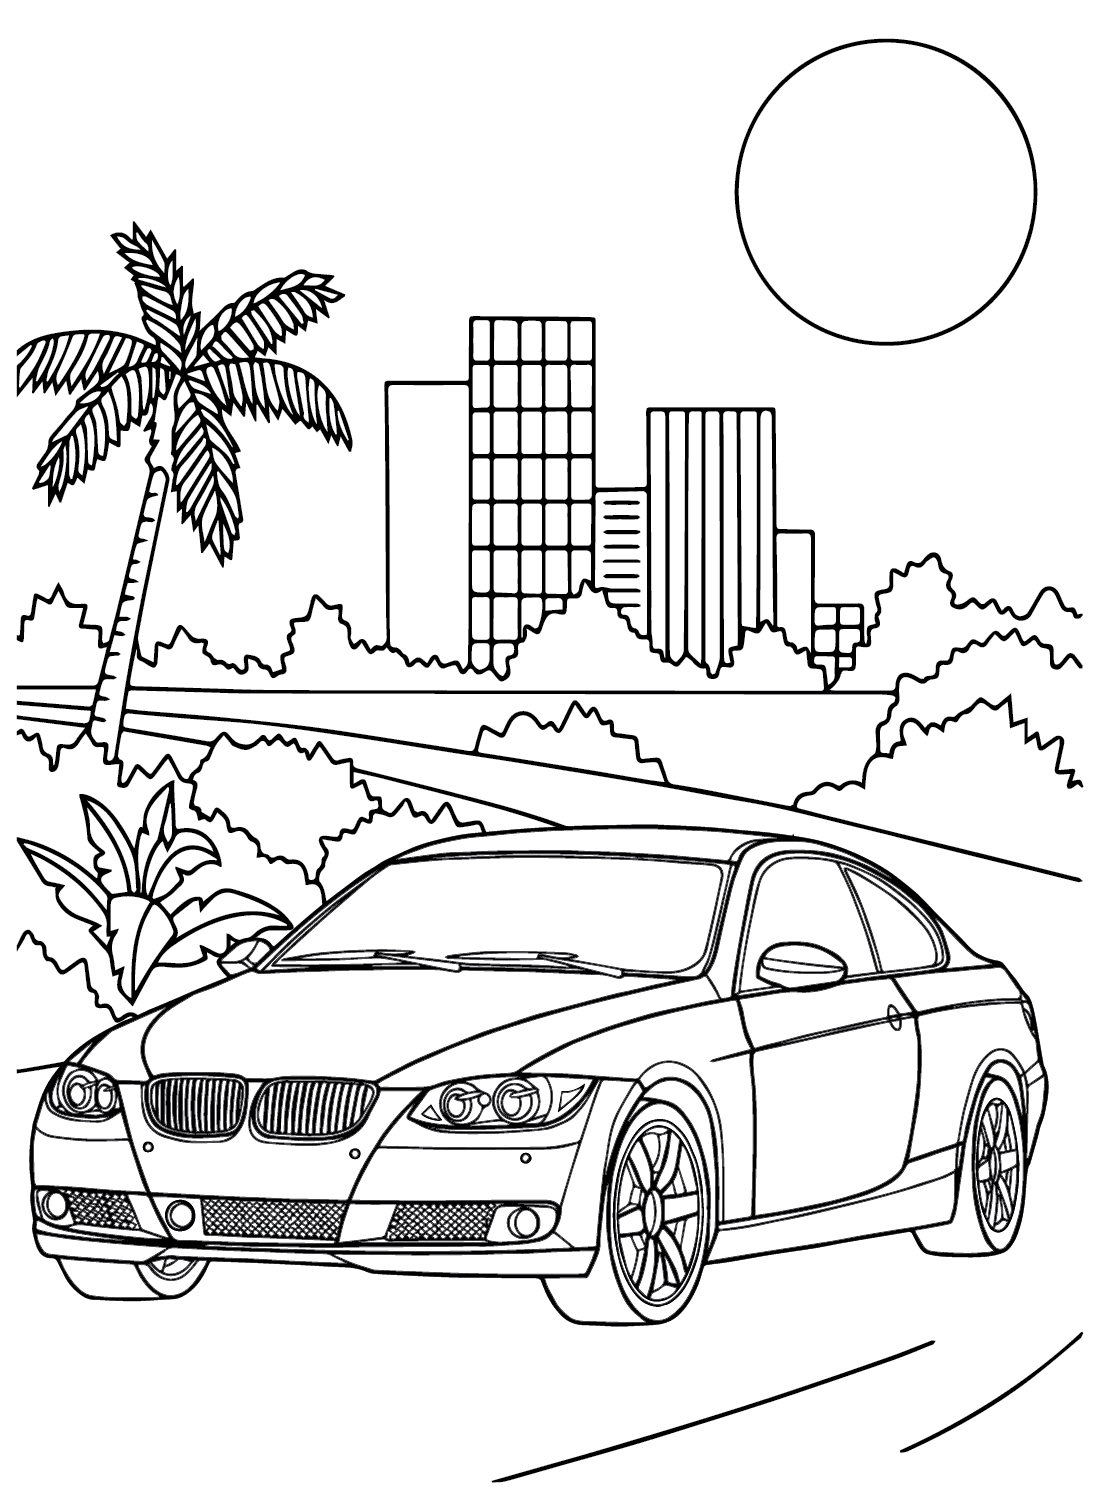 BMW 3 Series Coloring Page from BMW